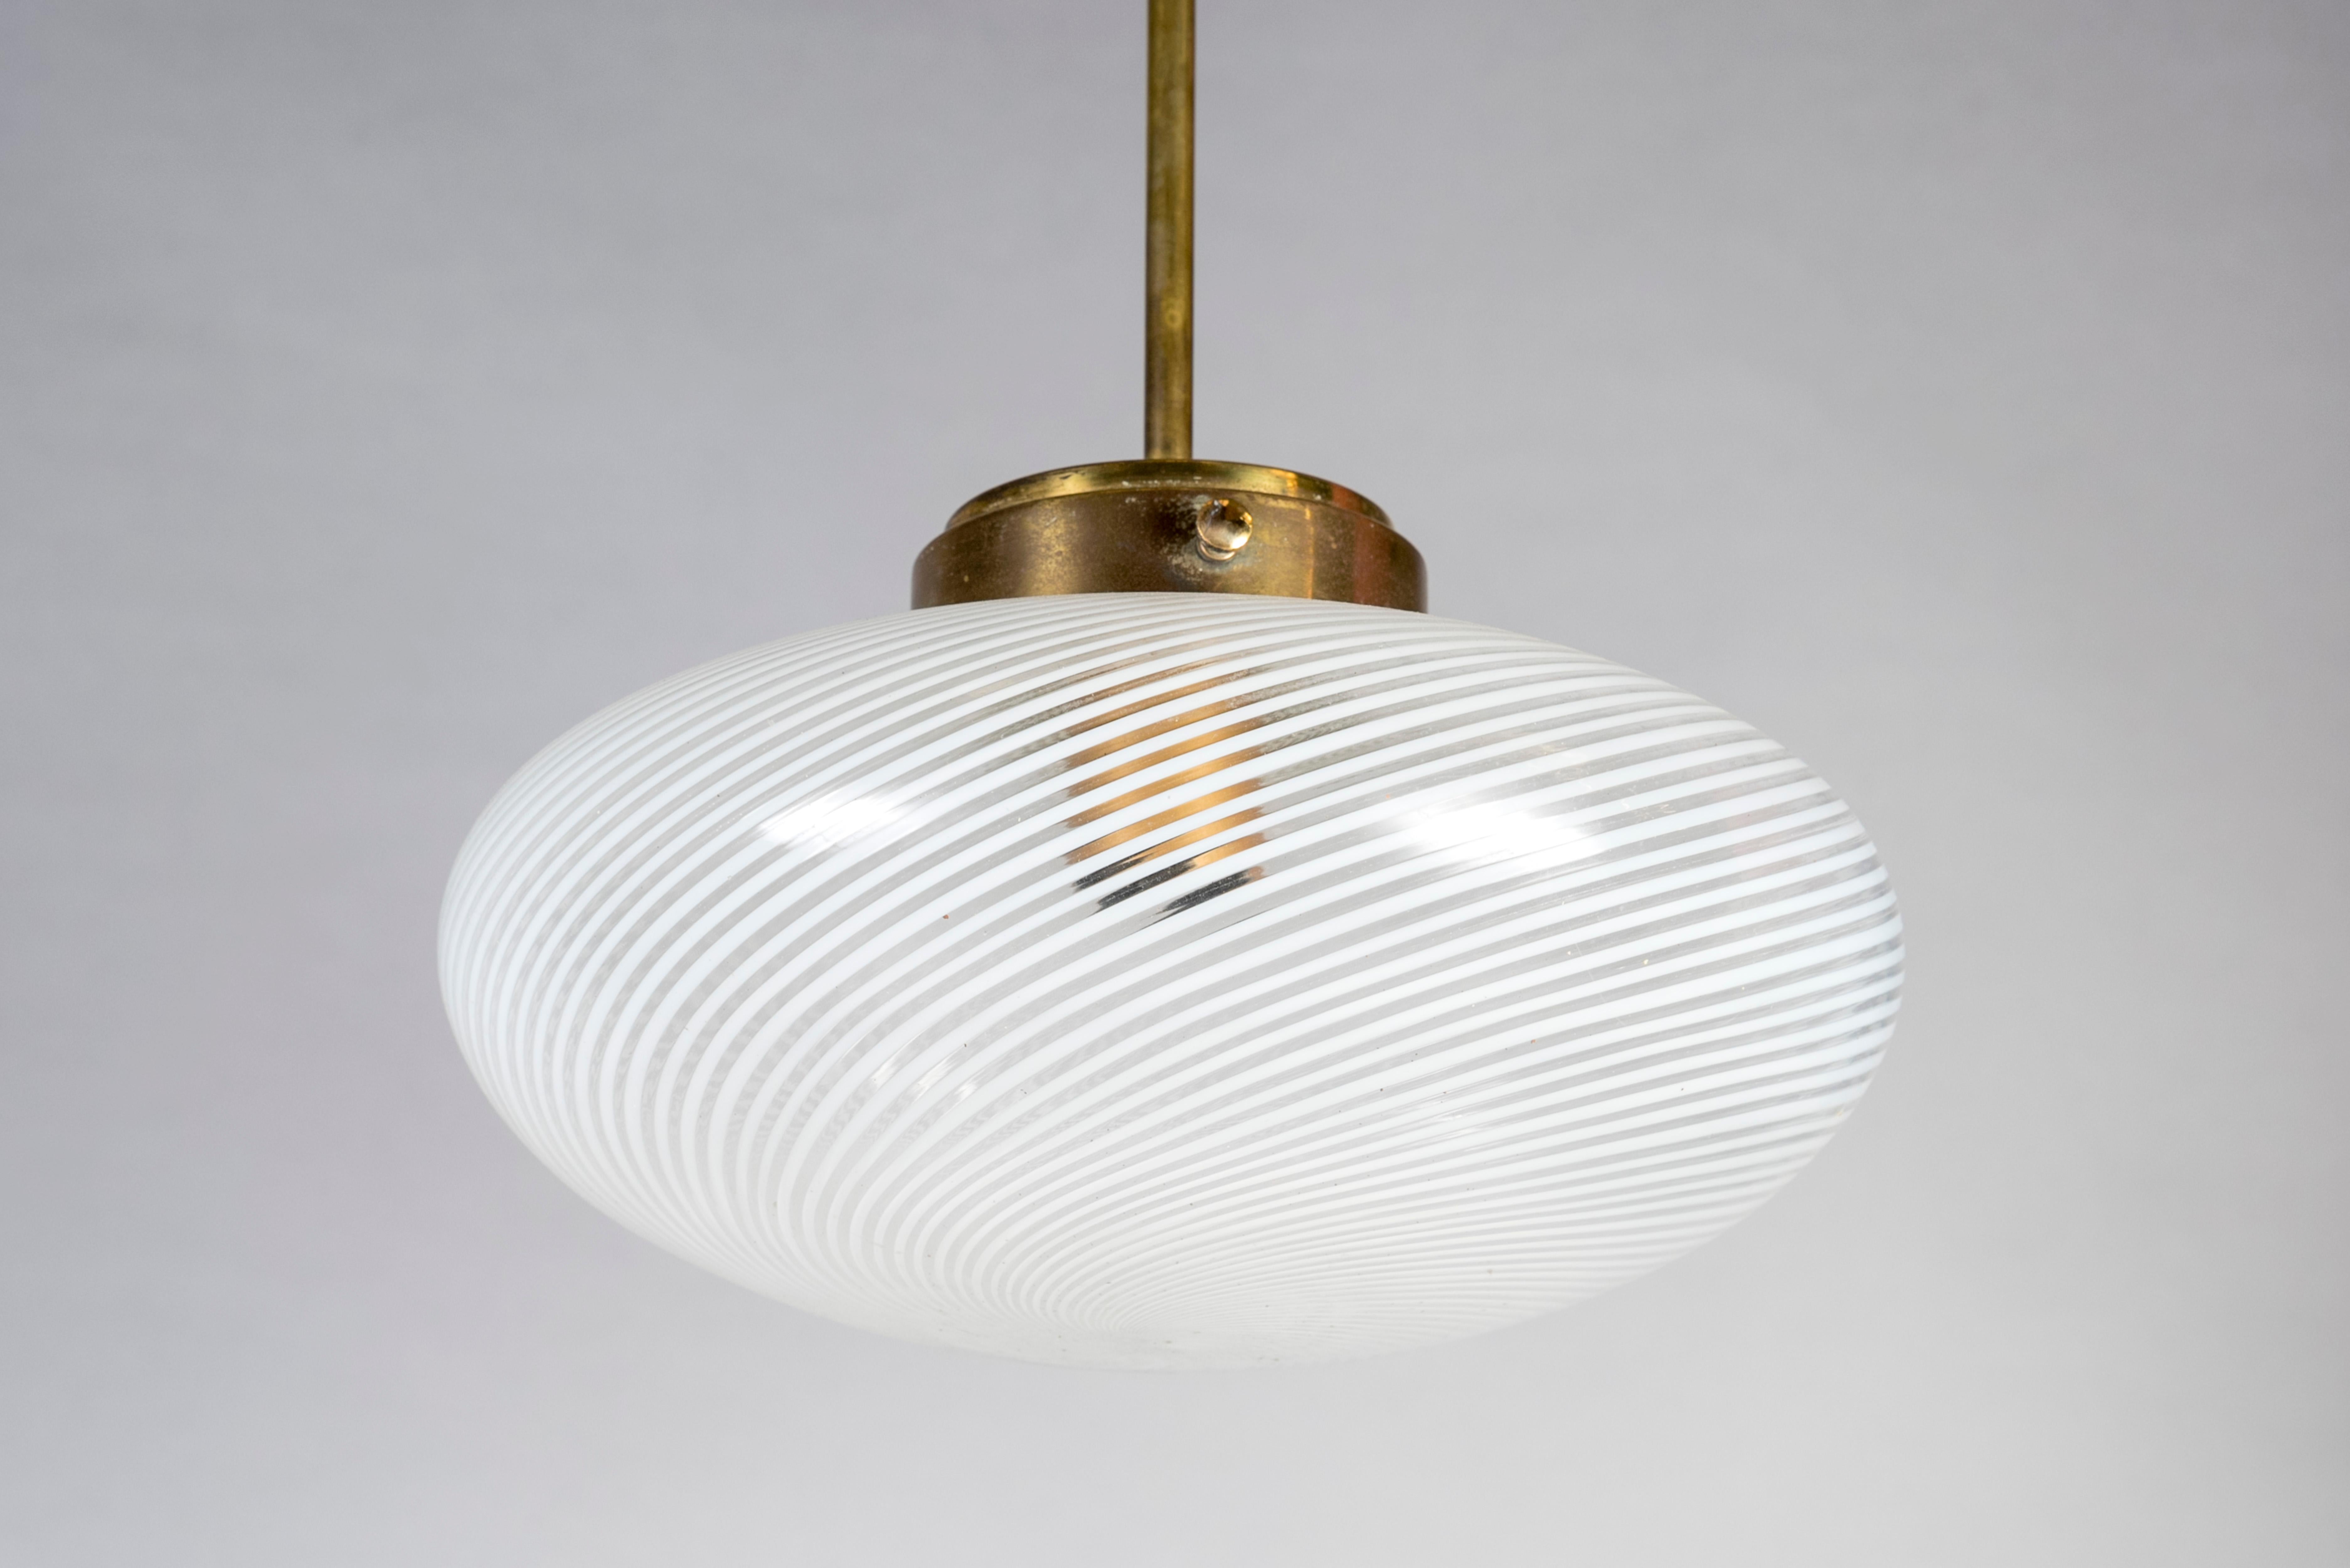 1940's Venini Murano Glass Pendant Light In Good Condition For Sale In Bois-Colombes, FR